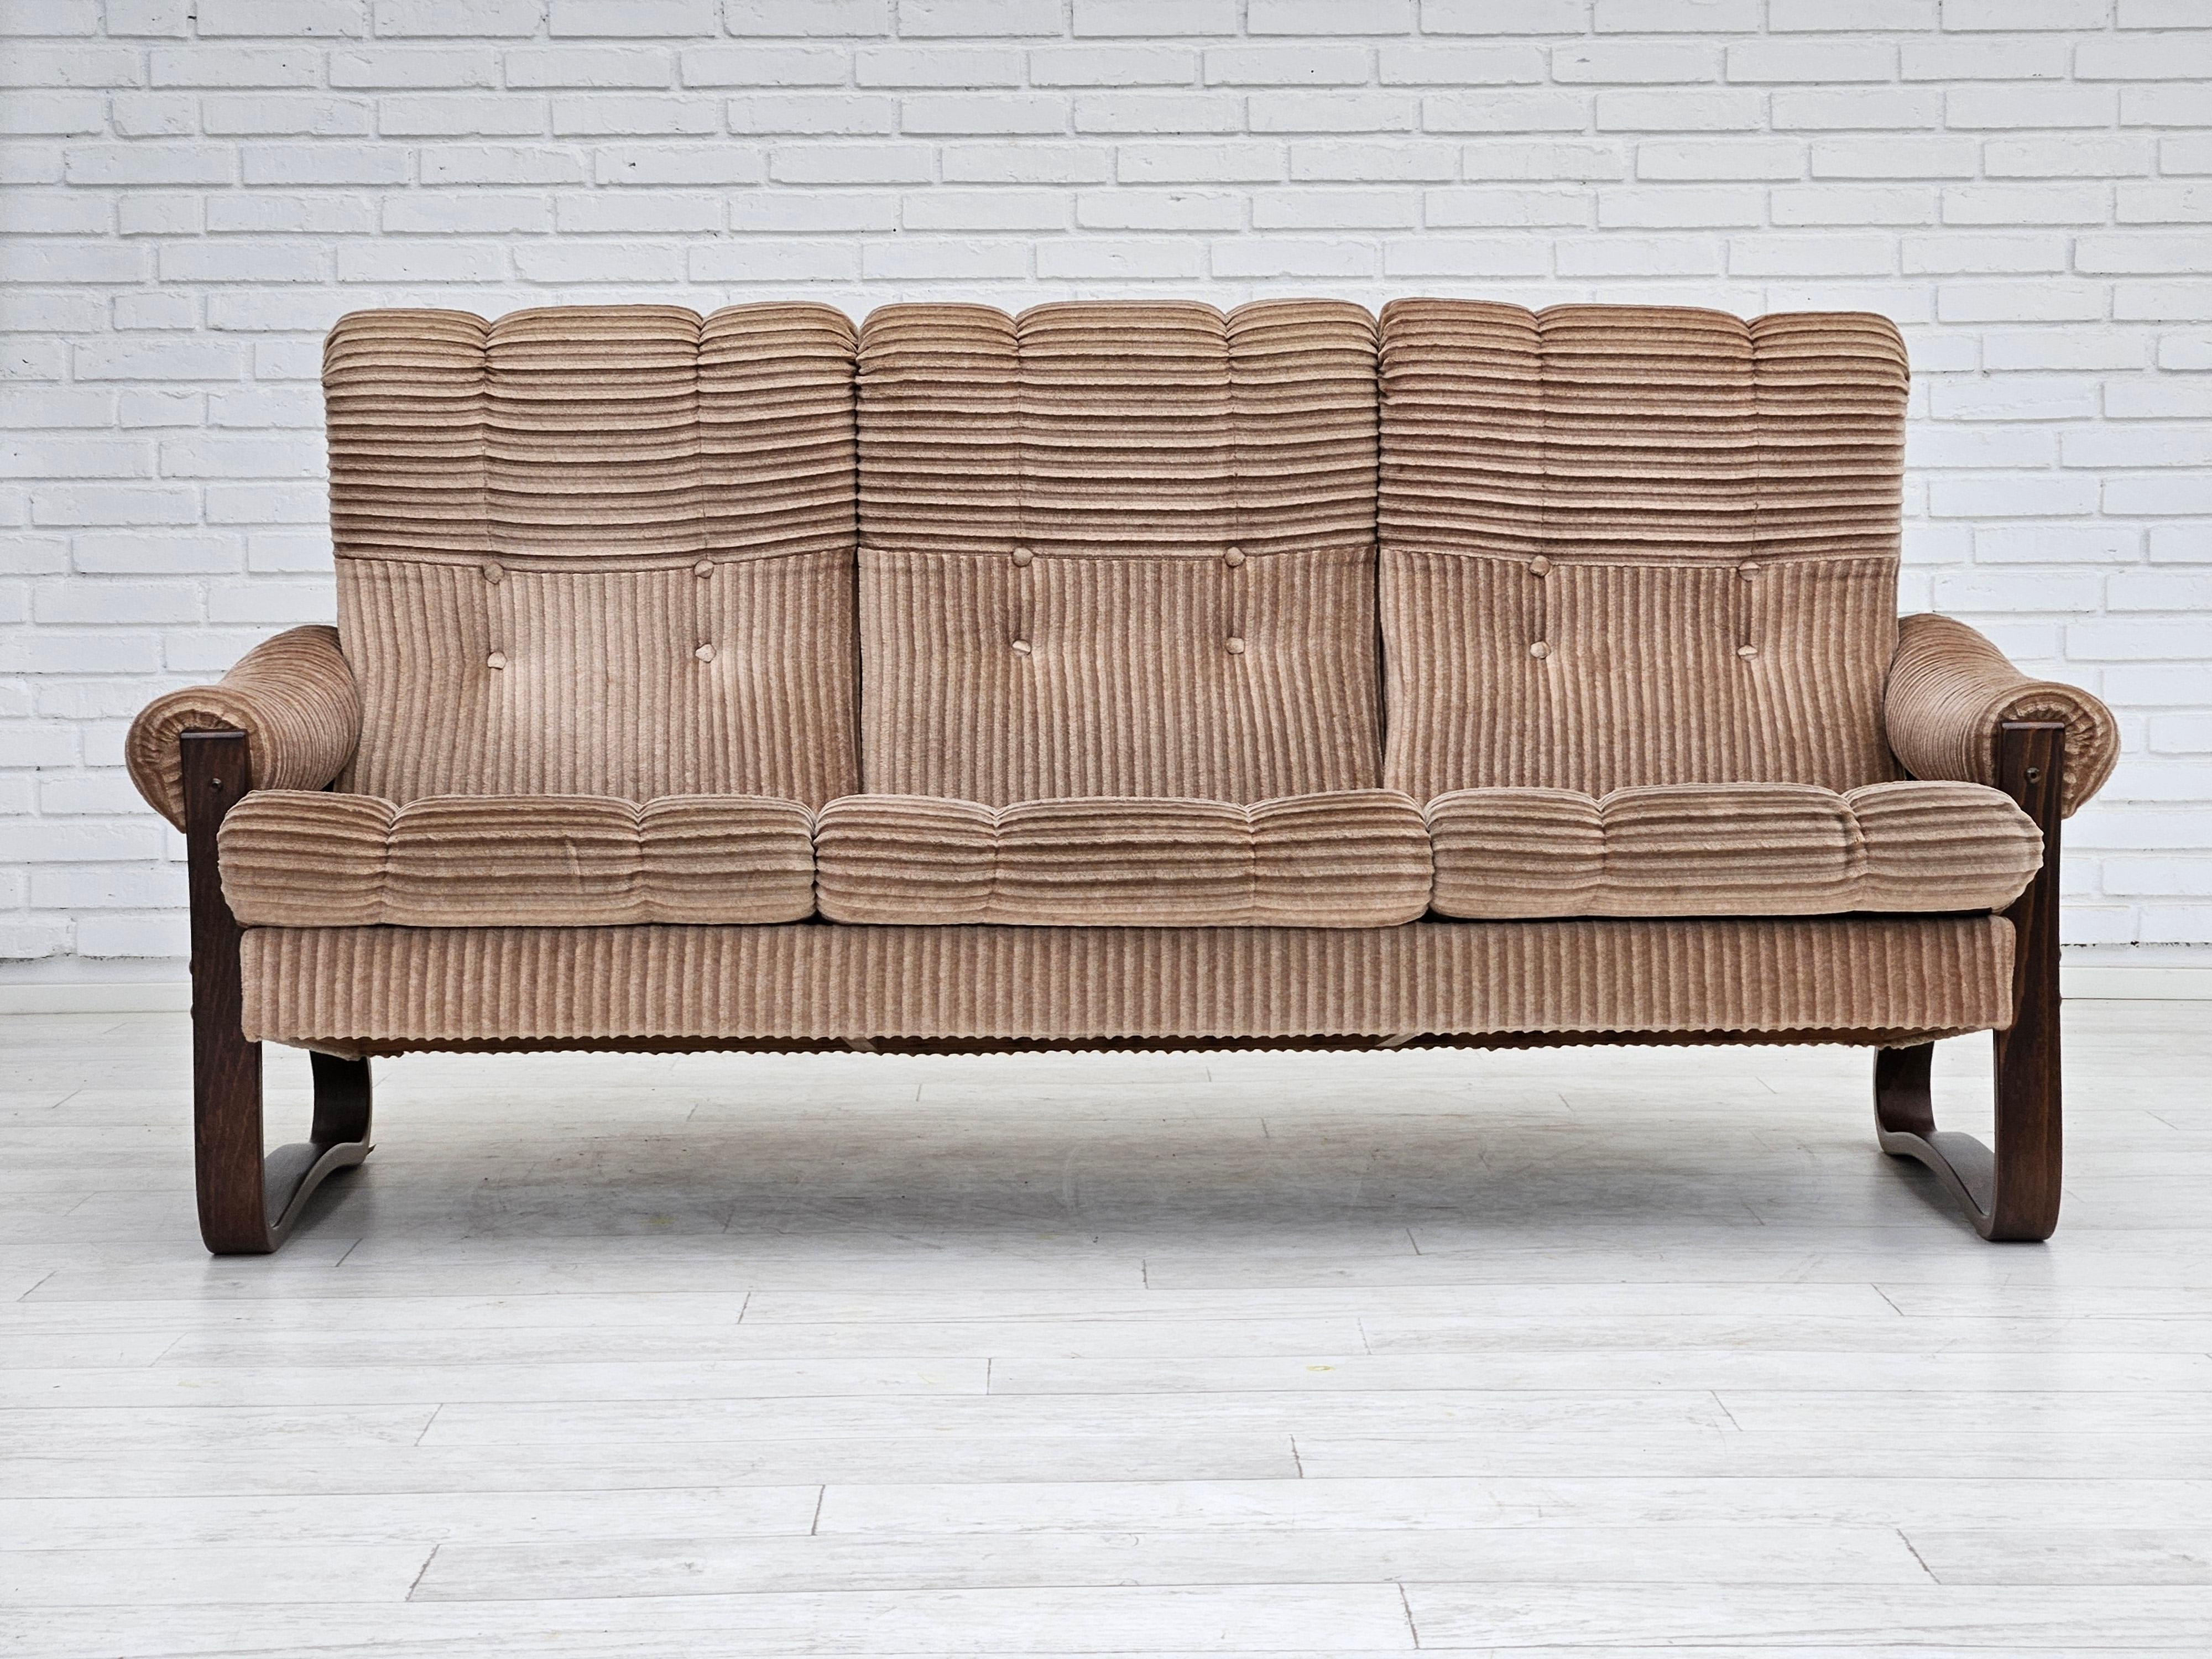 1970s, Danish 3 seater sofa in original very good condition: no smells, no stains. Light brown corduroy, bent wood. Manufactured by Danish furniture manufacturer in about 1970s.